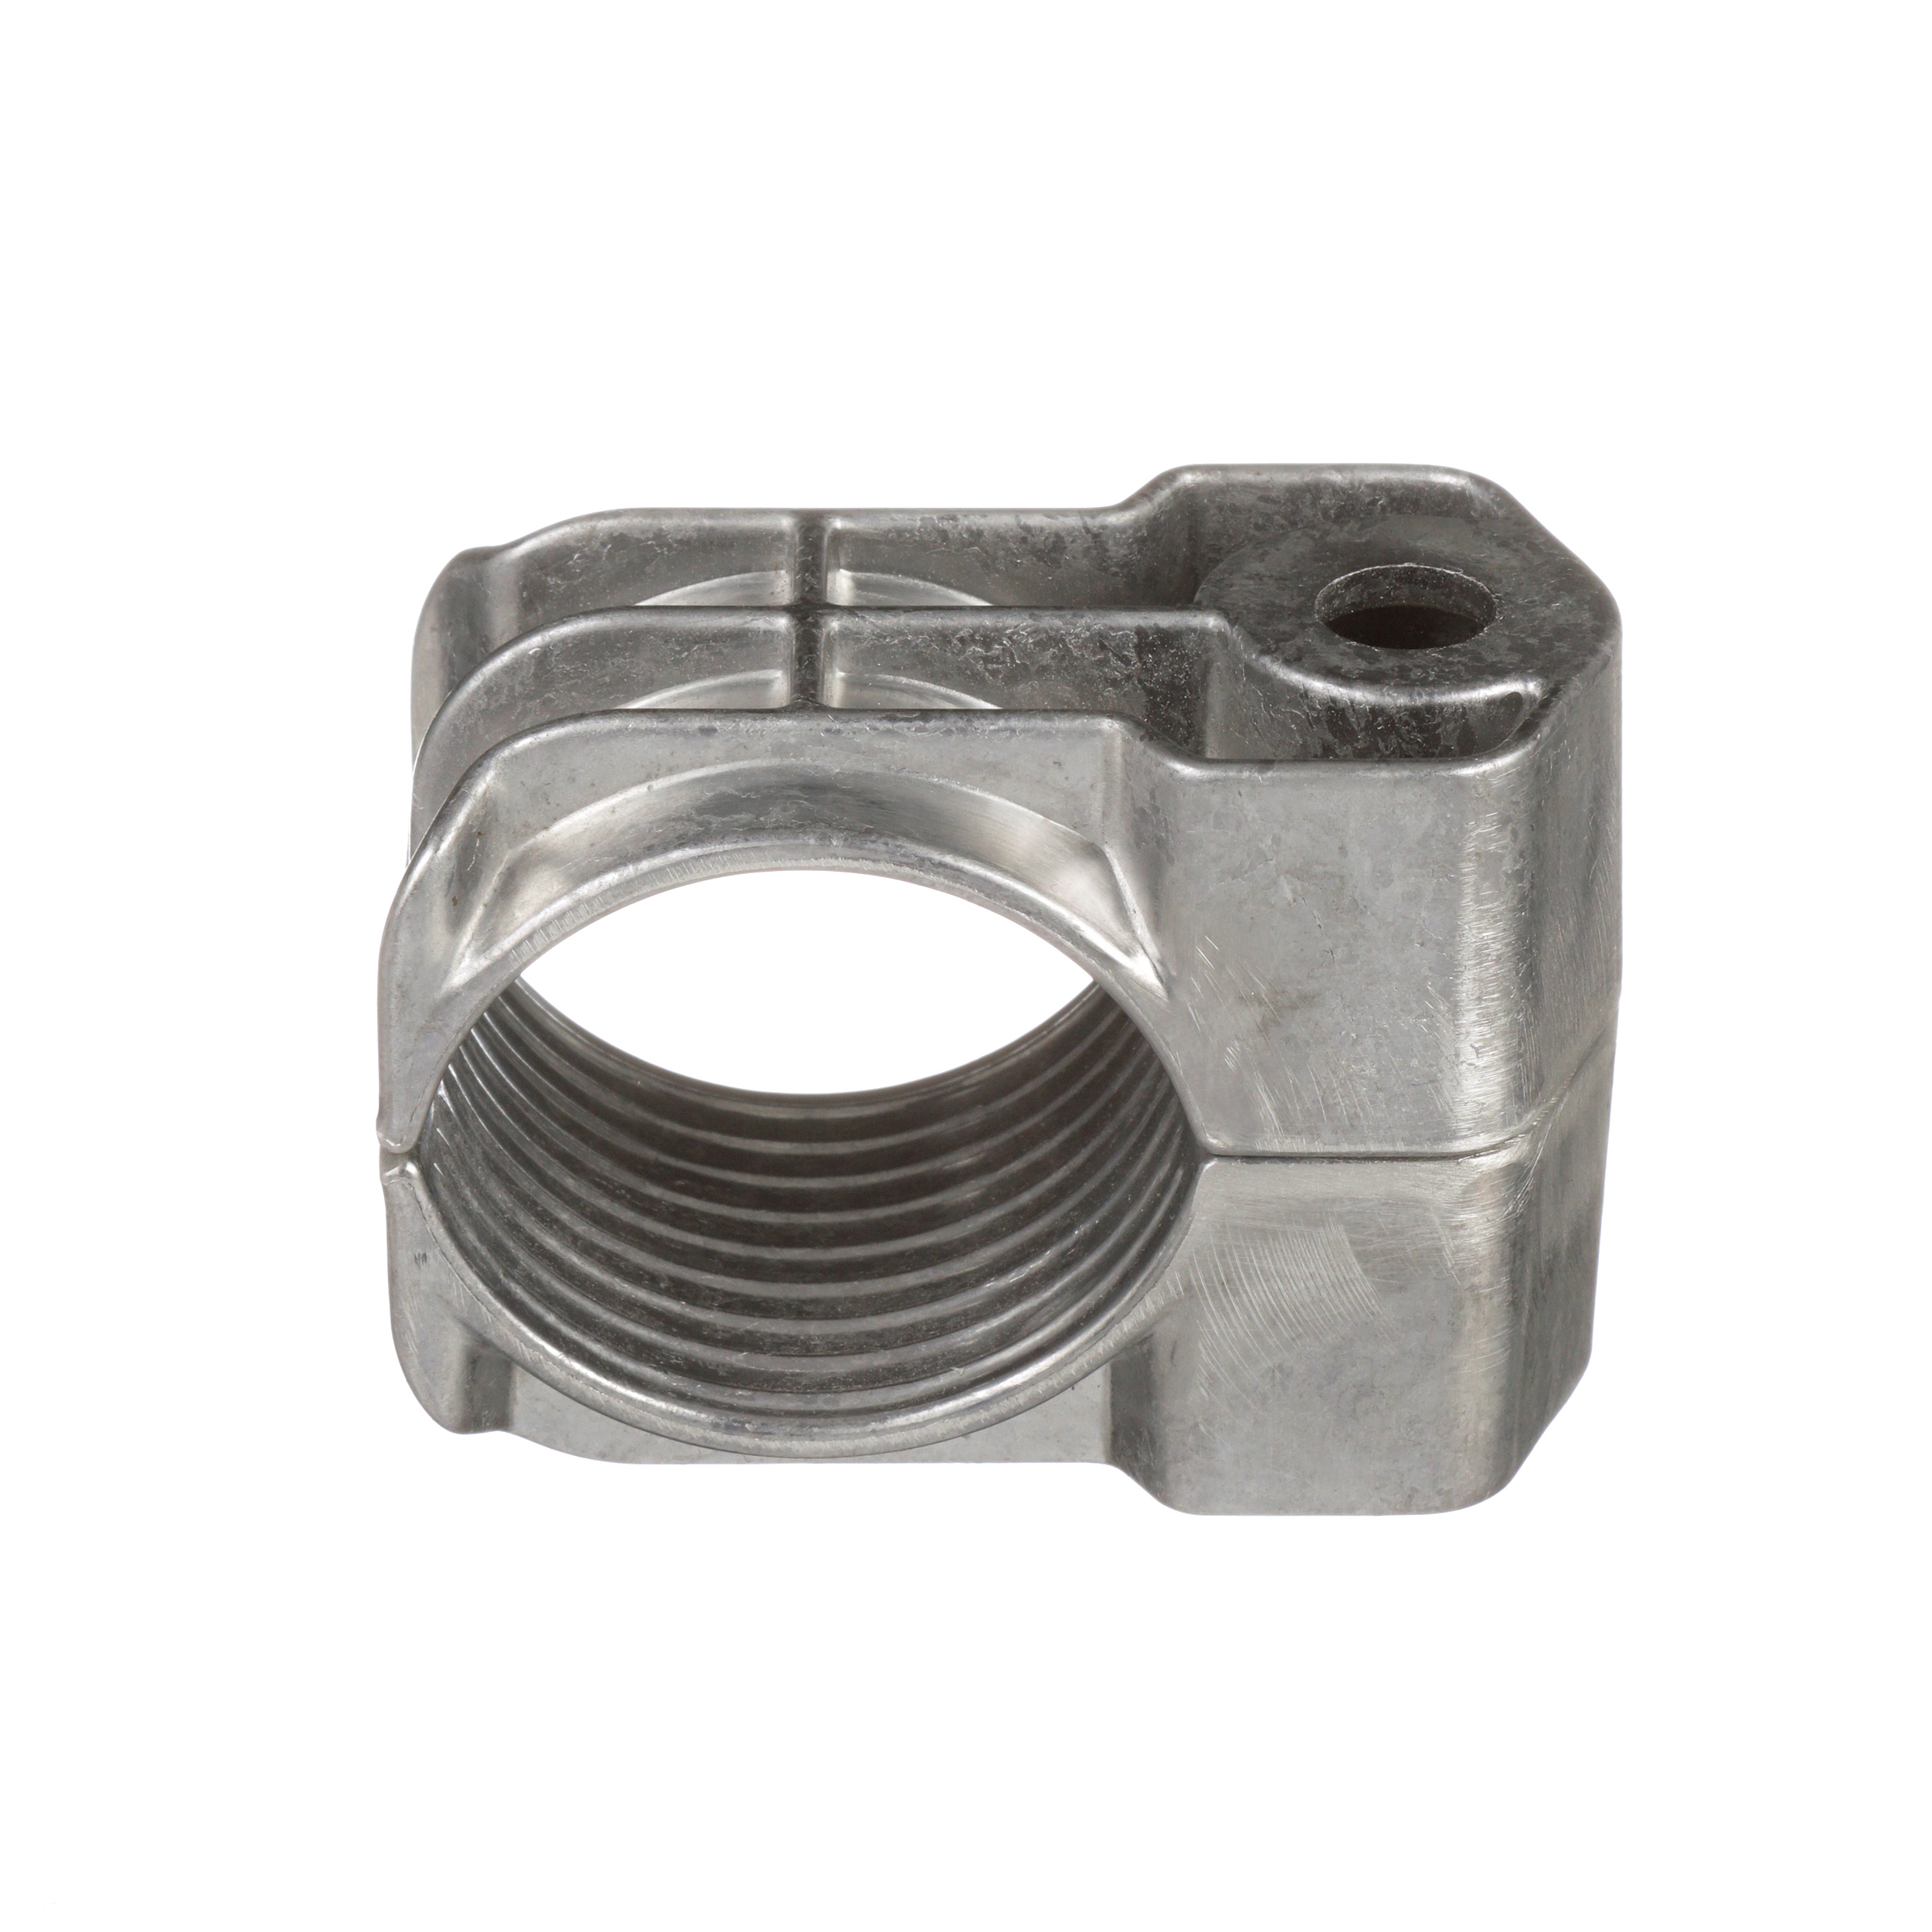 CCAL1H1923-X Cable Cleat, 1H Clamp Type, AL, Single Cable, 0.75-0.91in OD, PK10